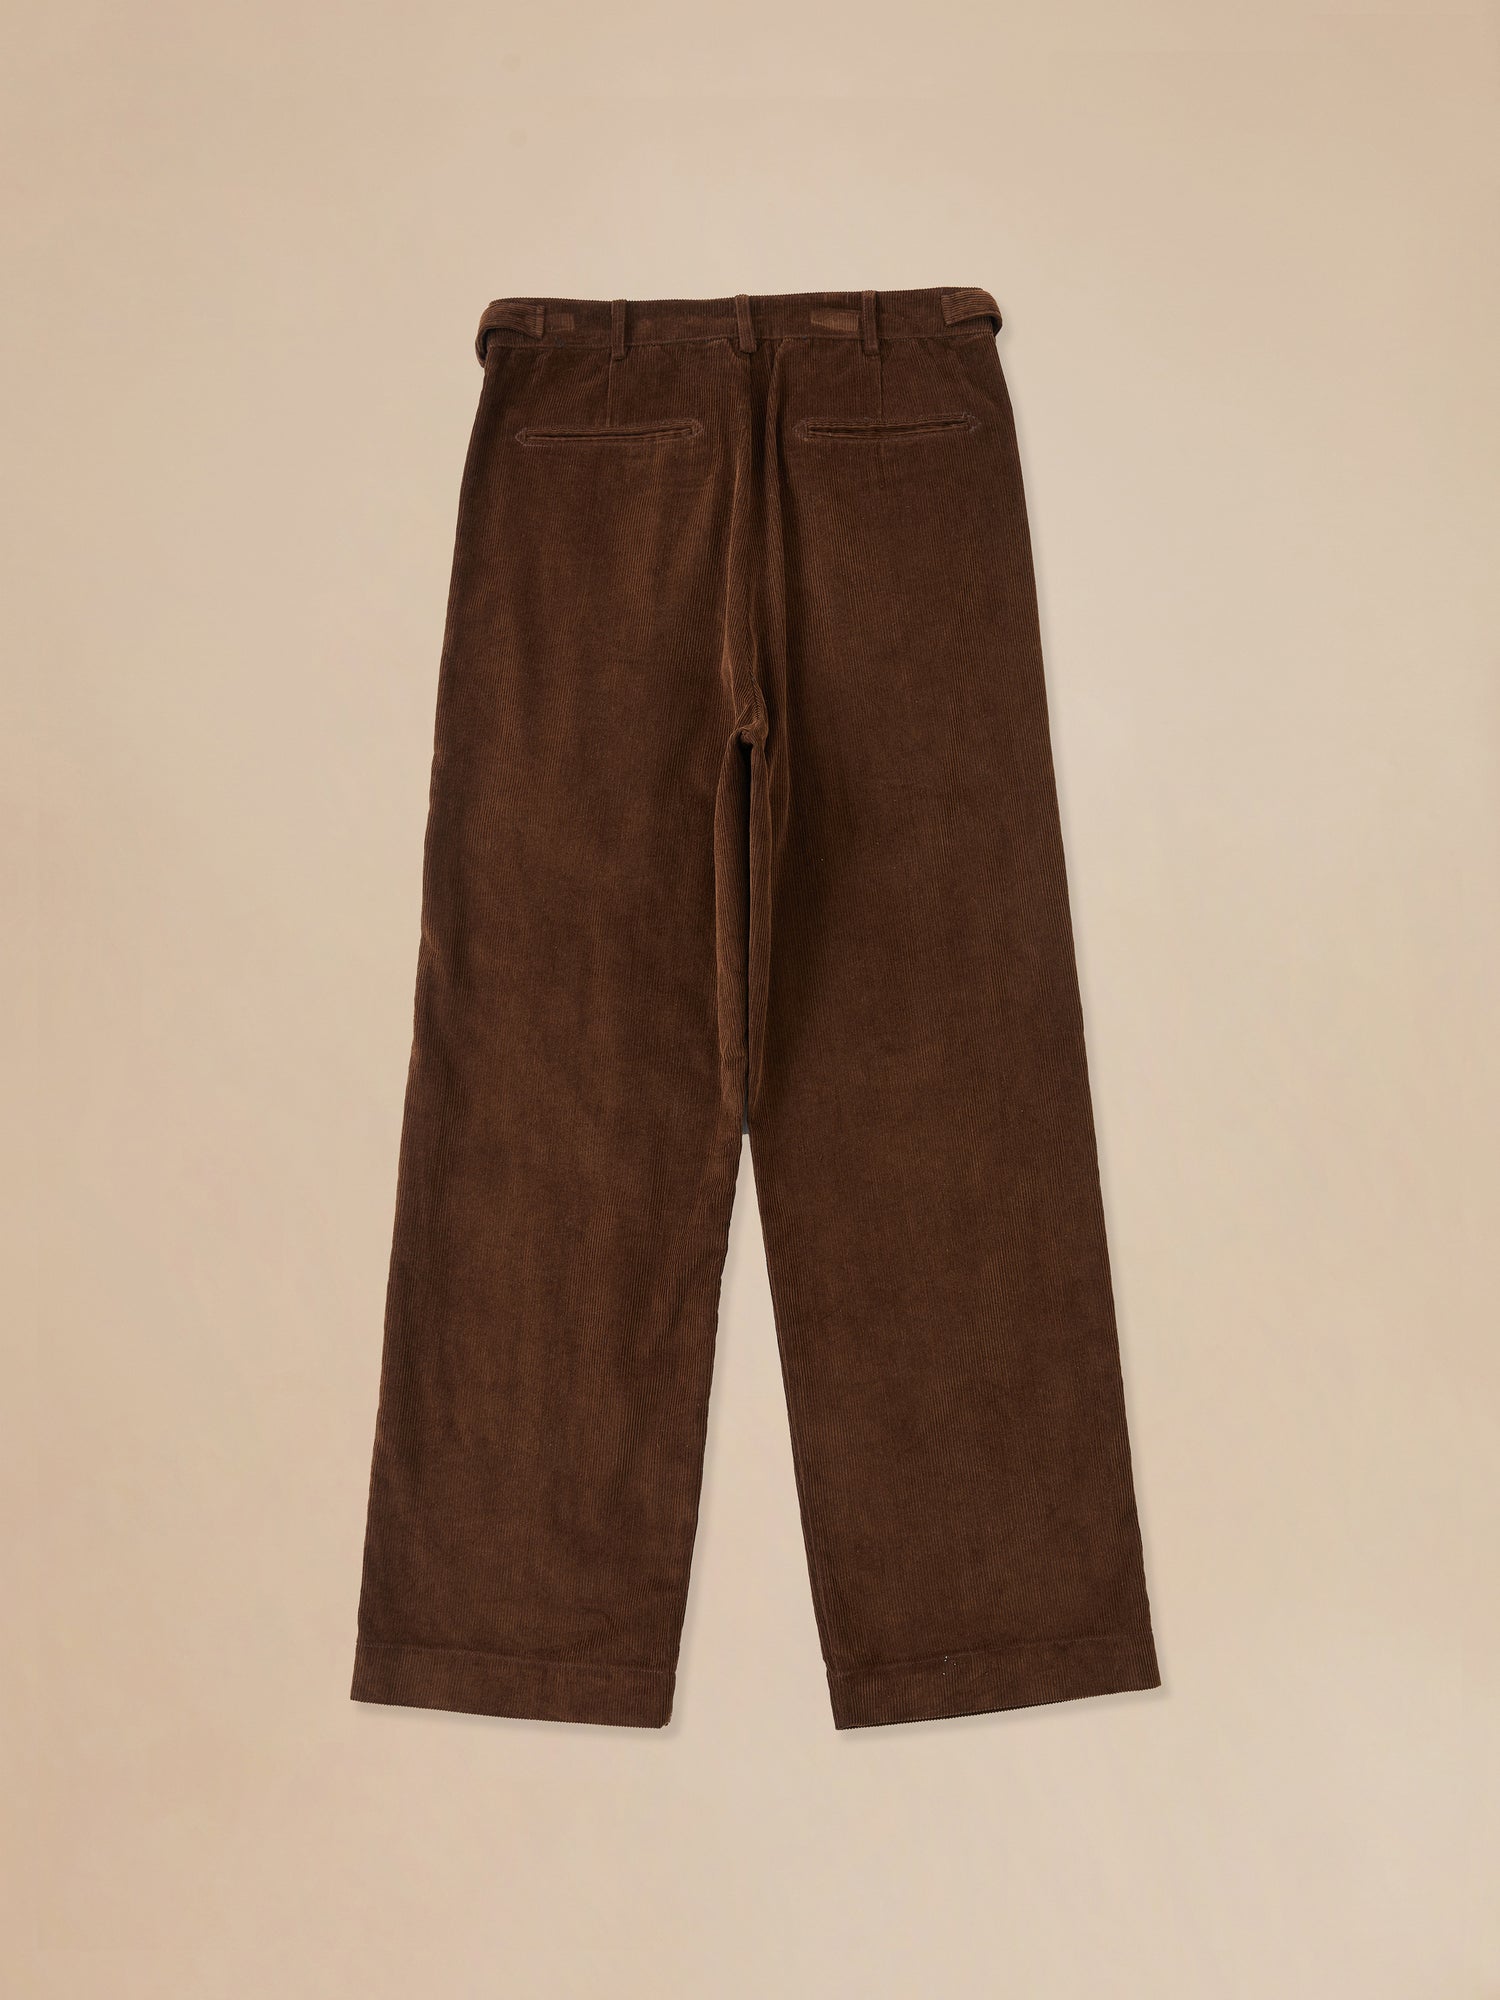 A Multi-Plaid Patch Corduroy Pant by Found with fabric patches.